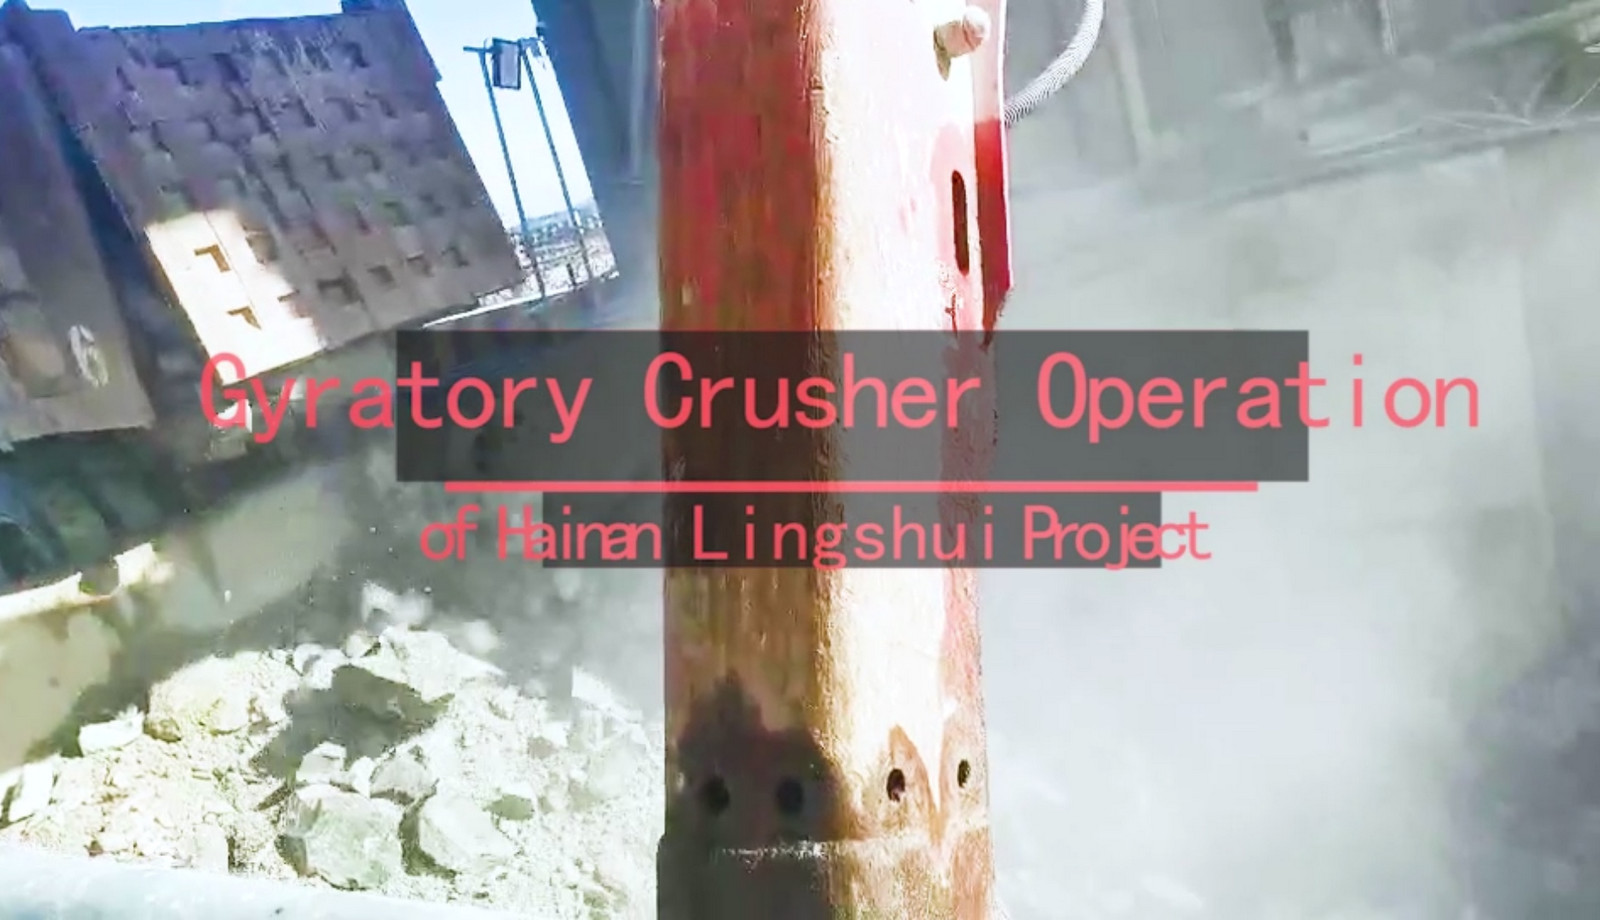 Gyratory Crusher Operation of Hainan Lingshui Project